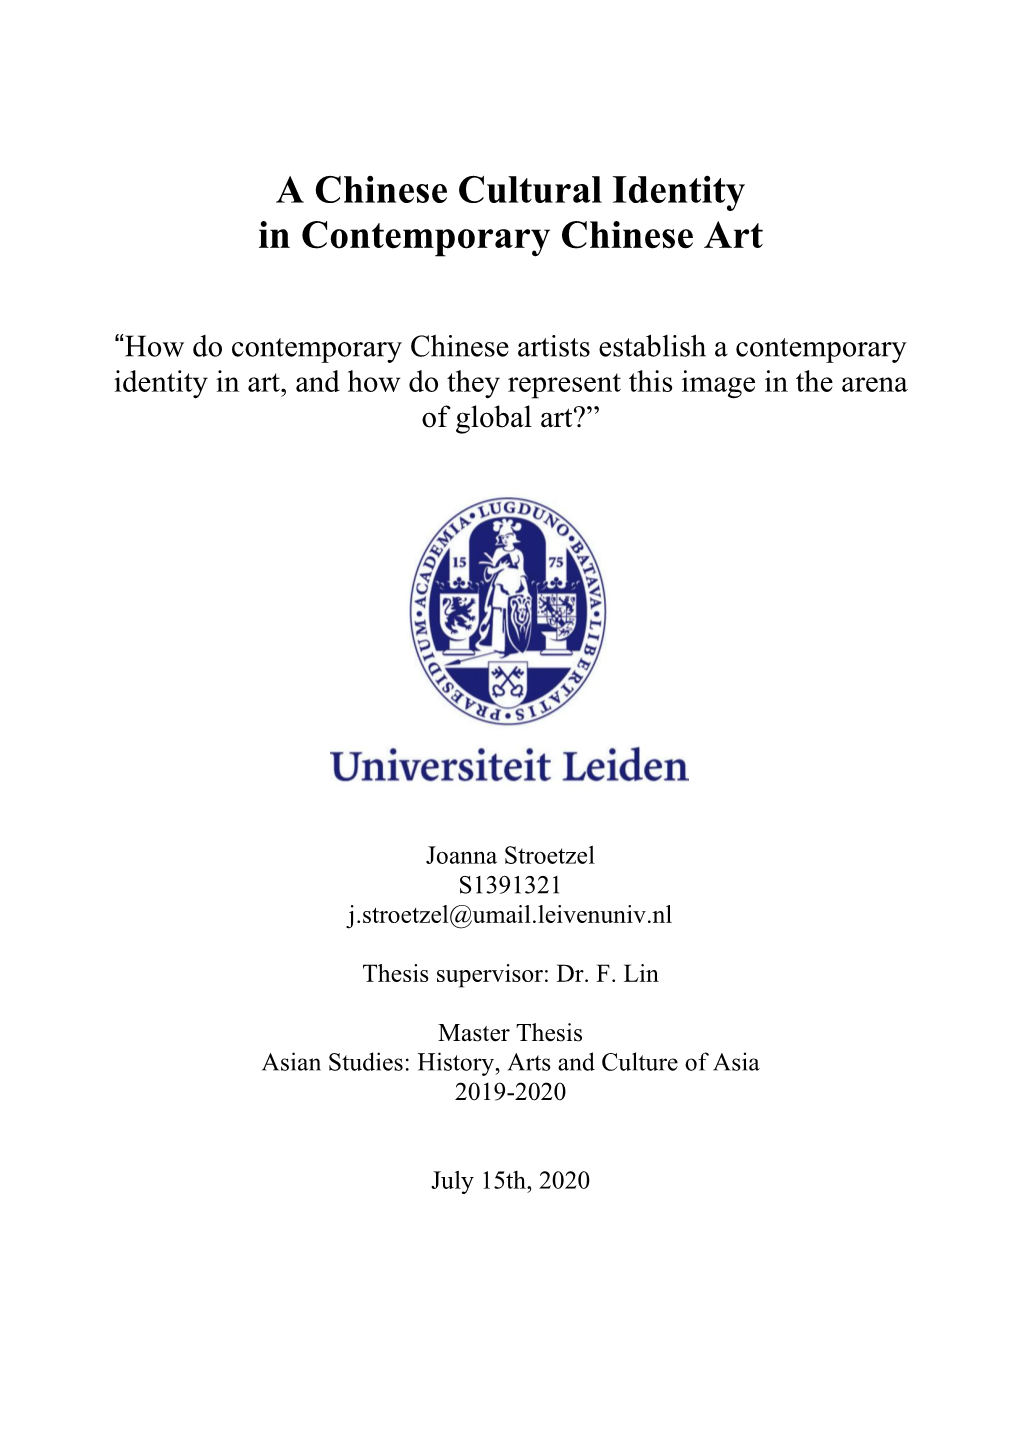 A Chinese Cultural Identity in Contemporary Chinese Art